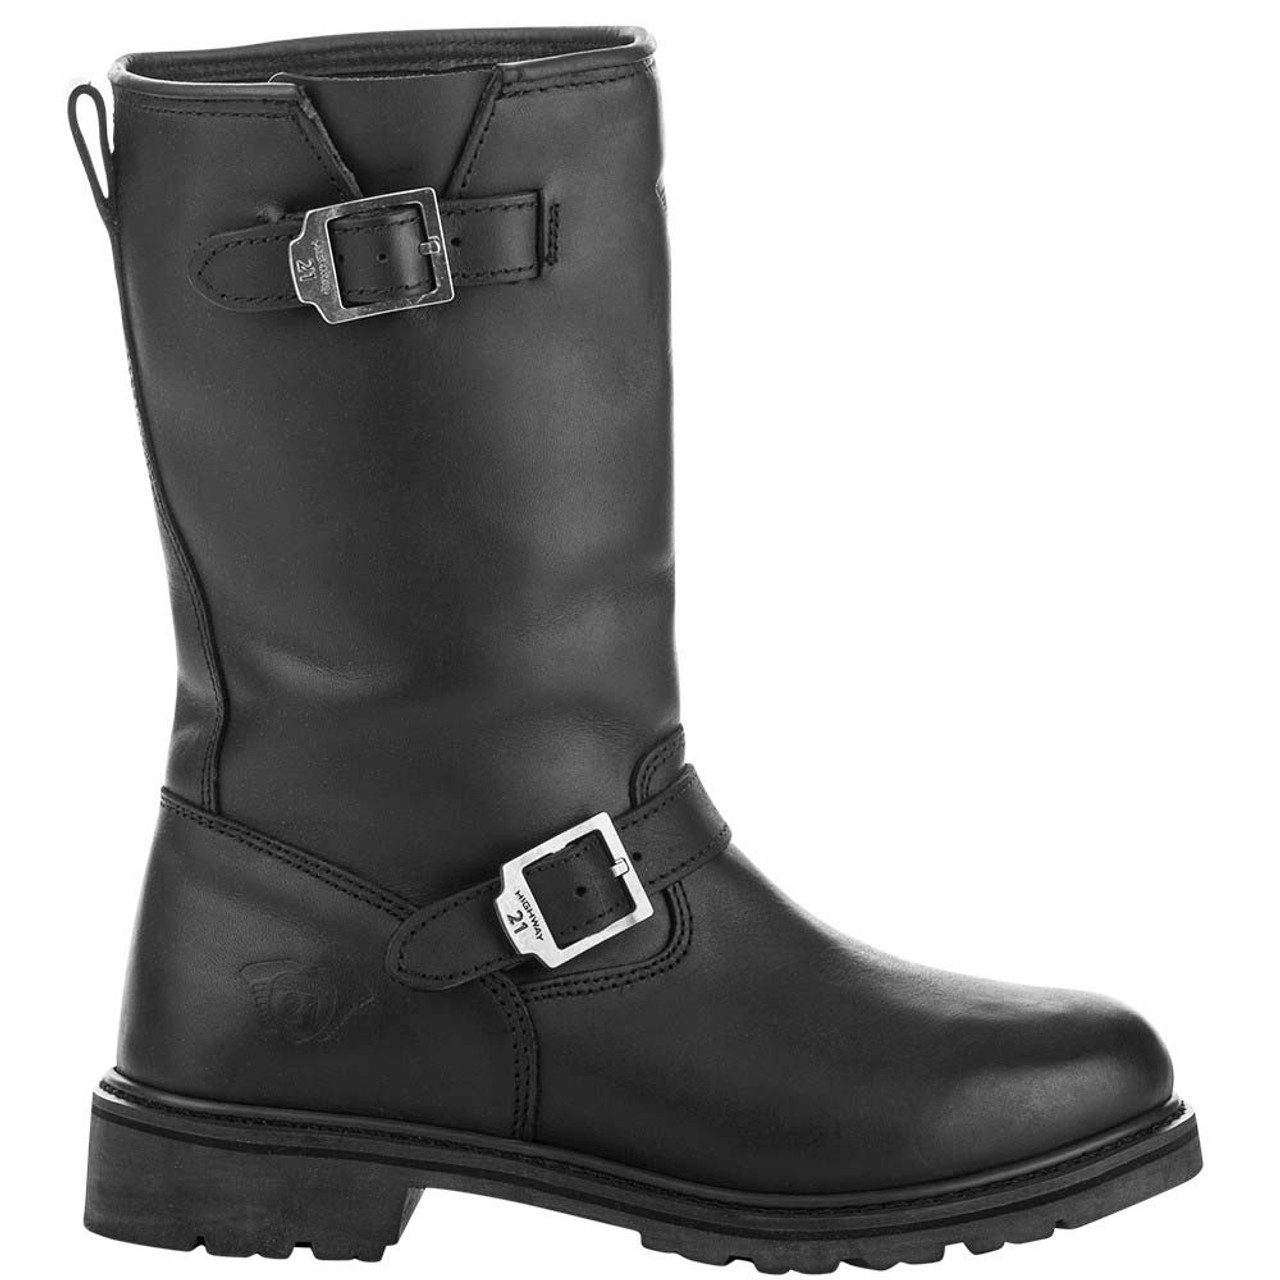 Tall Primary Engineer Boots | Highway 21